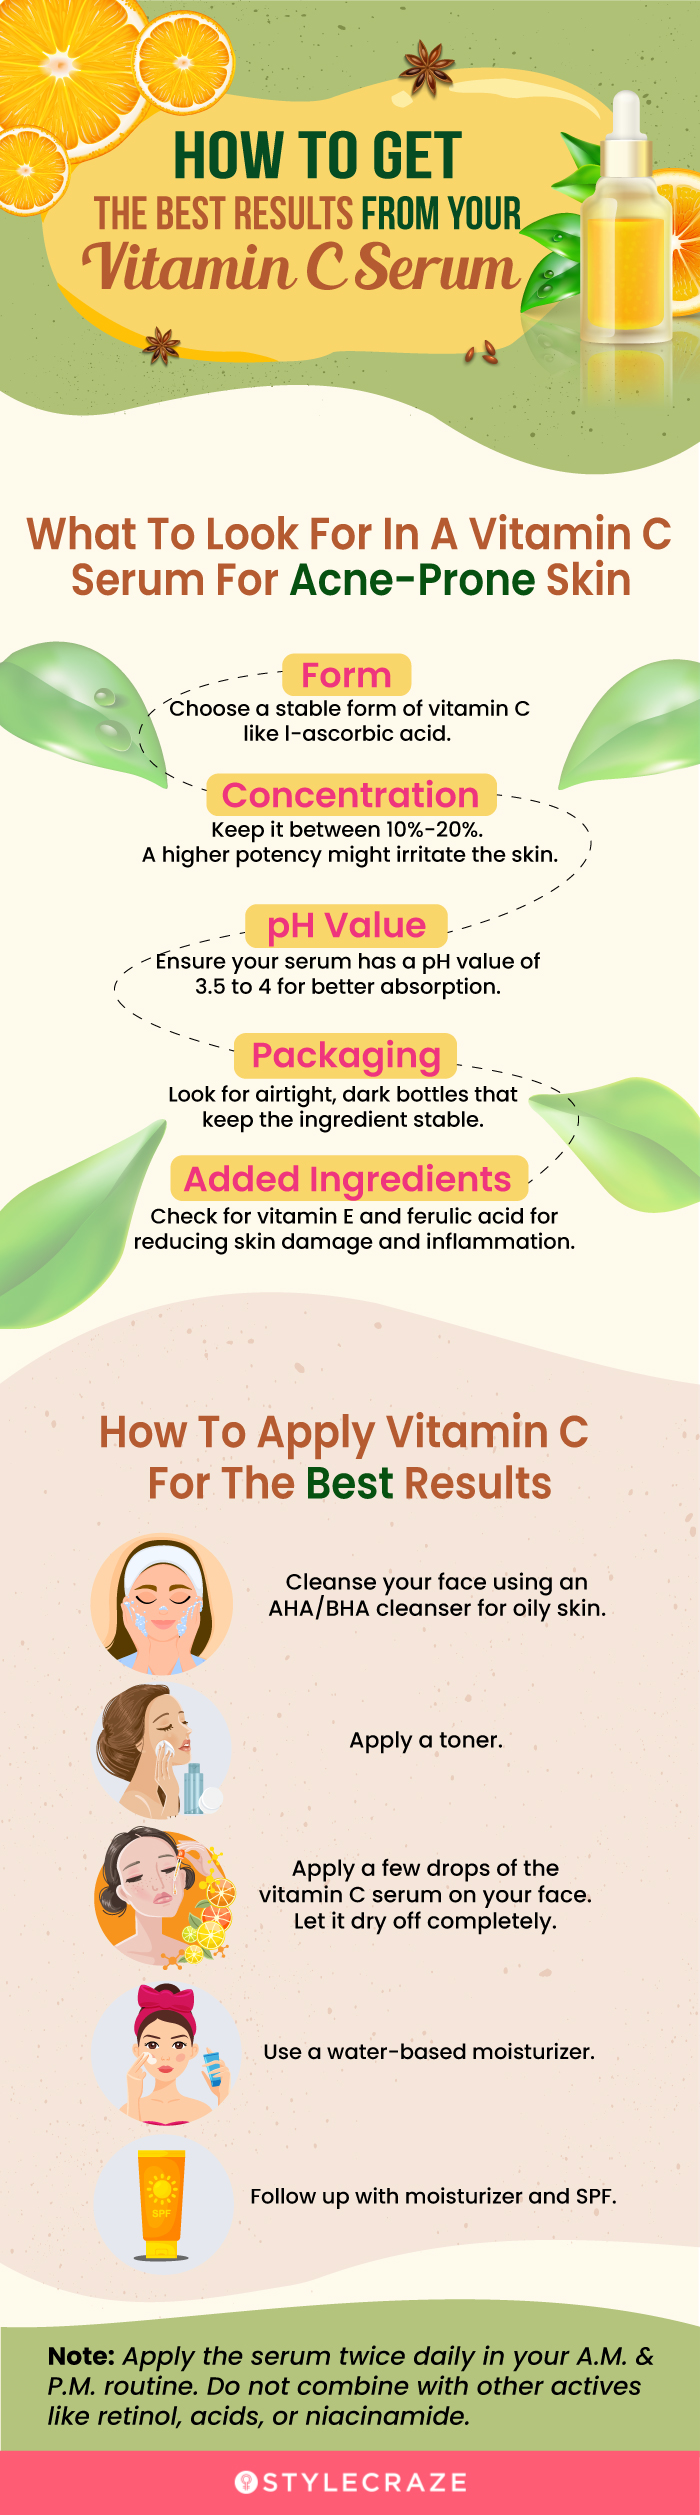 How To Get The Best Results From Your Vitamin C [infographic]